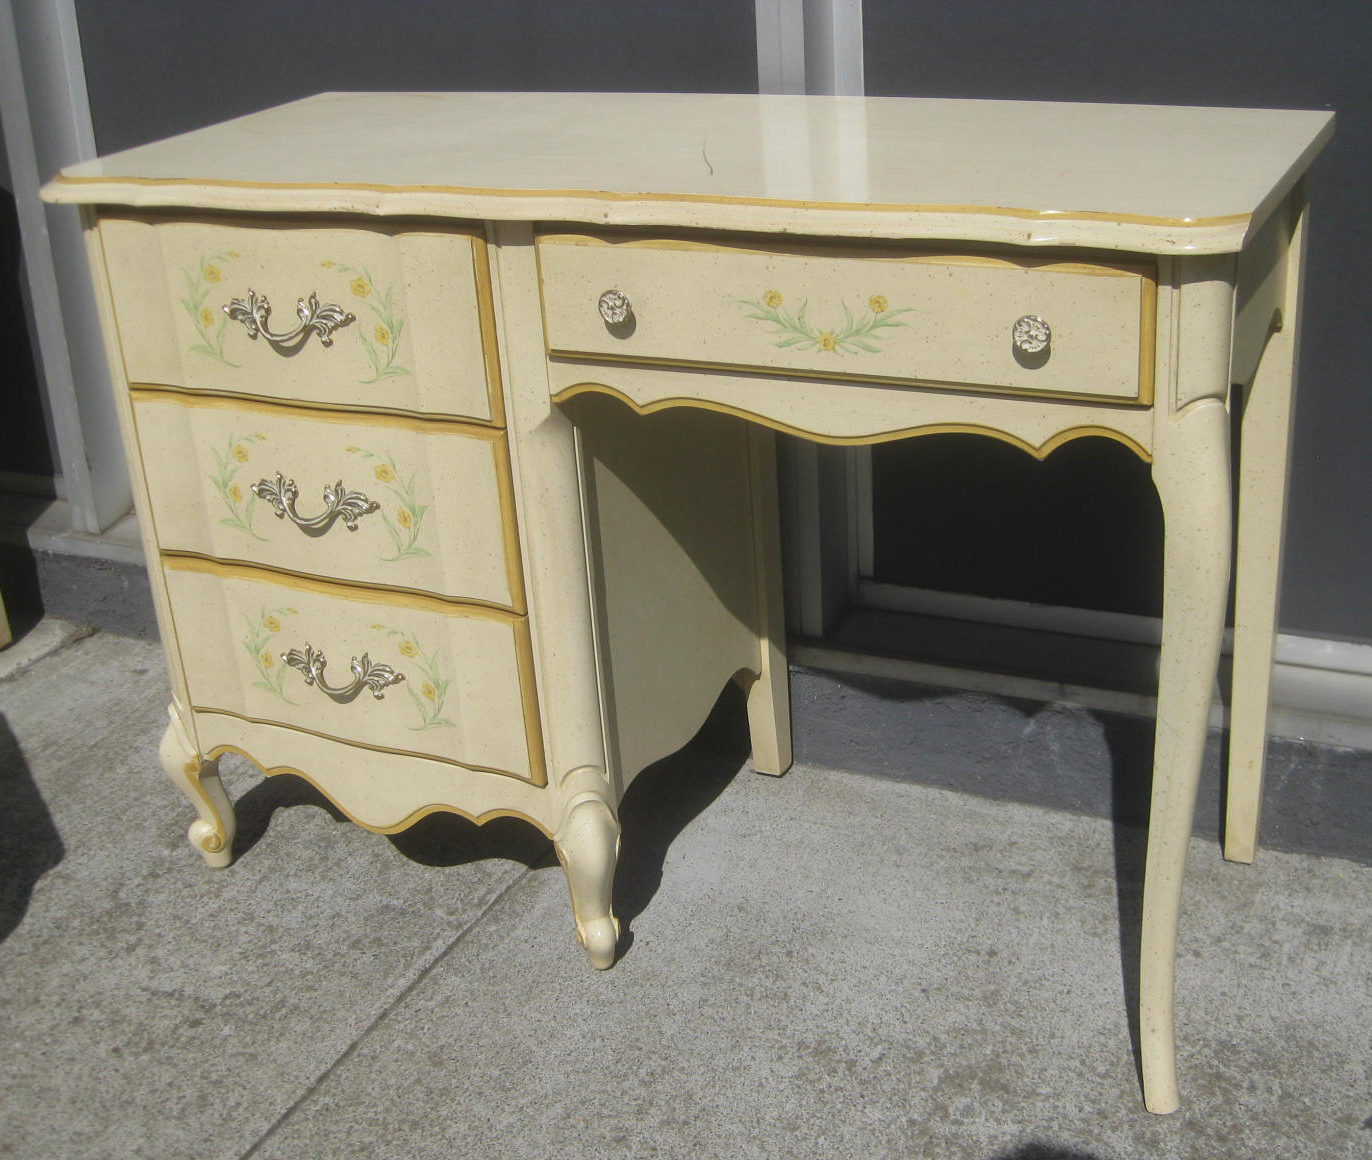 UHURU FURNITURE & COLLECTIBLES: SOLD - French Provincial Bedroom Set